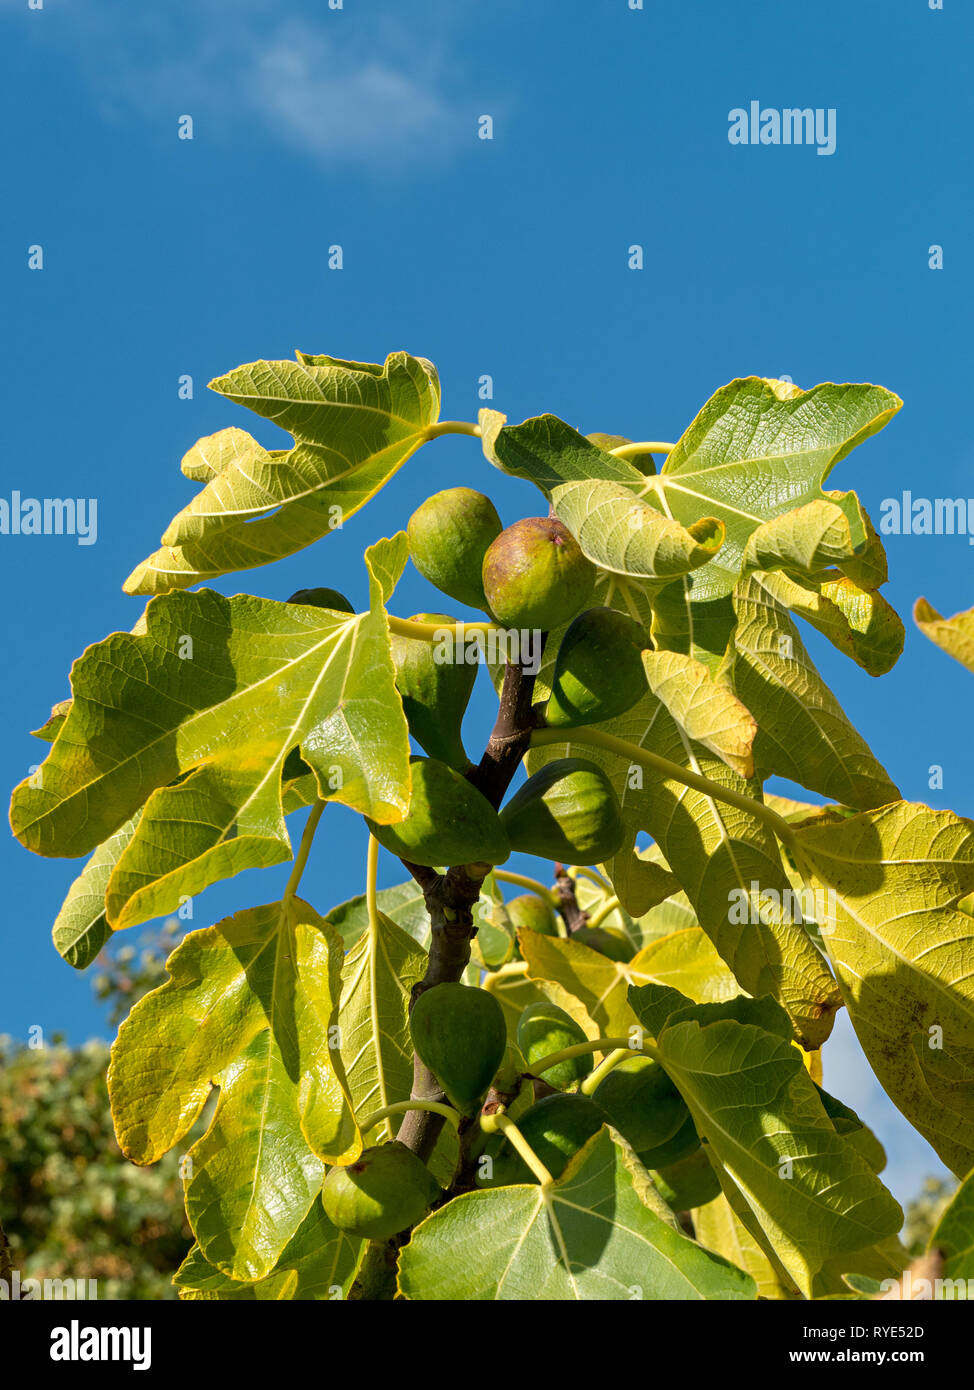 Sunlit green Figs growing on a fig tree (Ficus carica Angelique) branch with leaves against blue sky, Autumn, England, UK Stock Photo